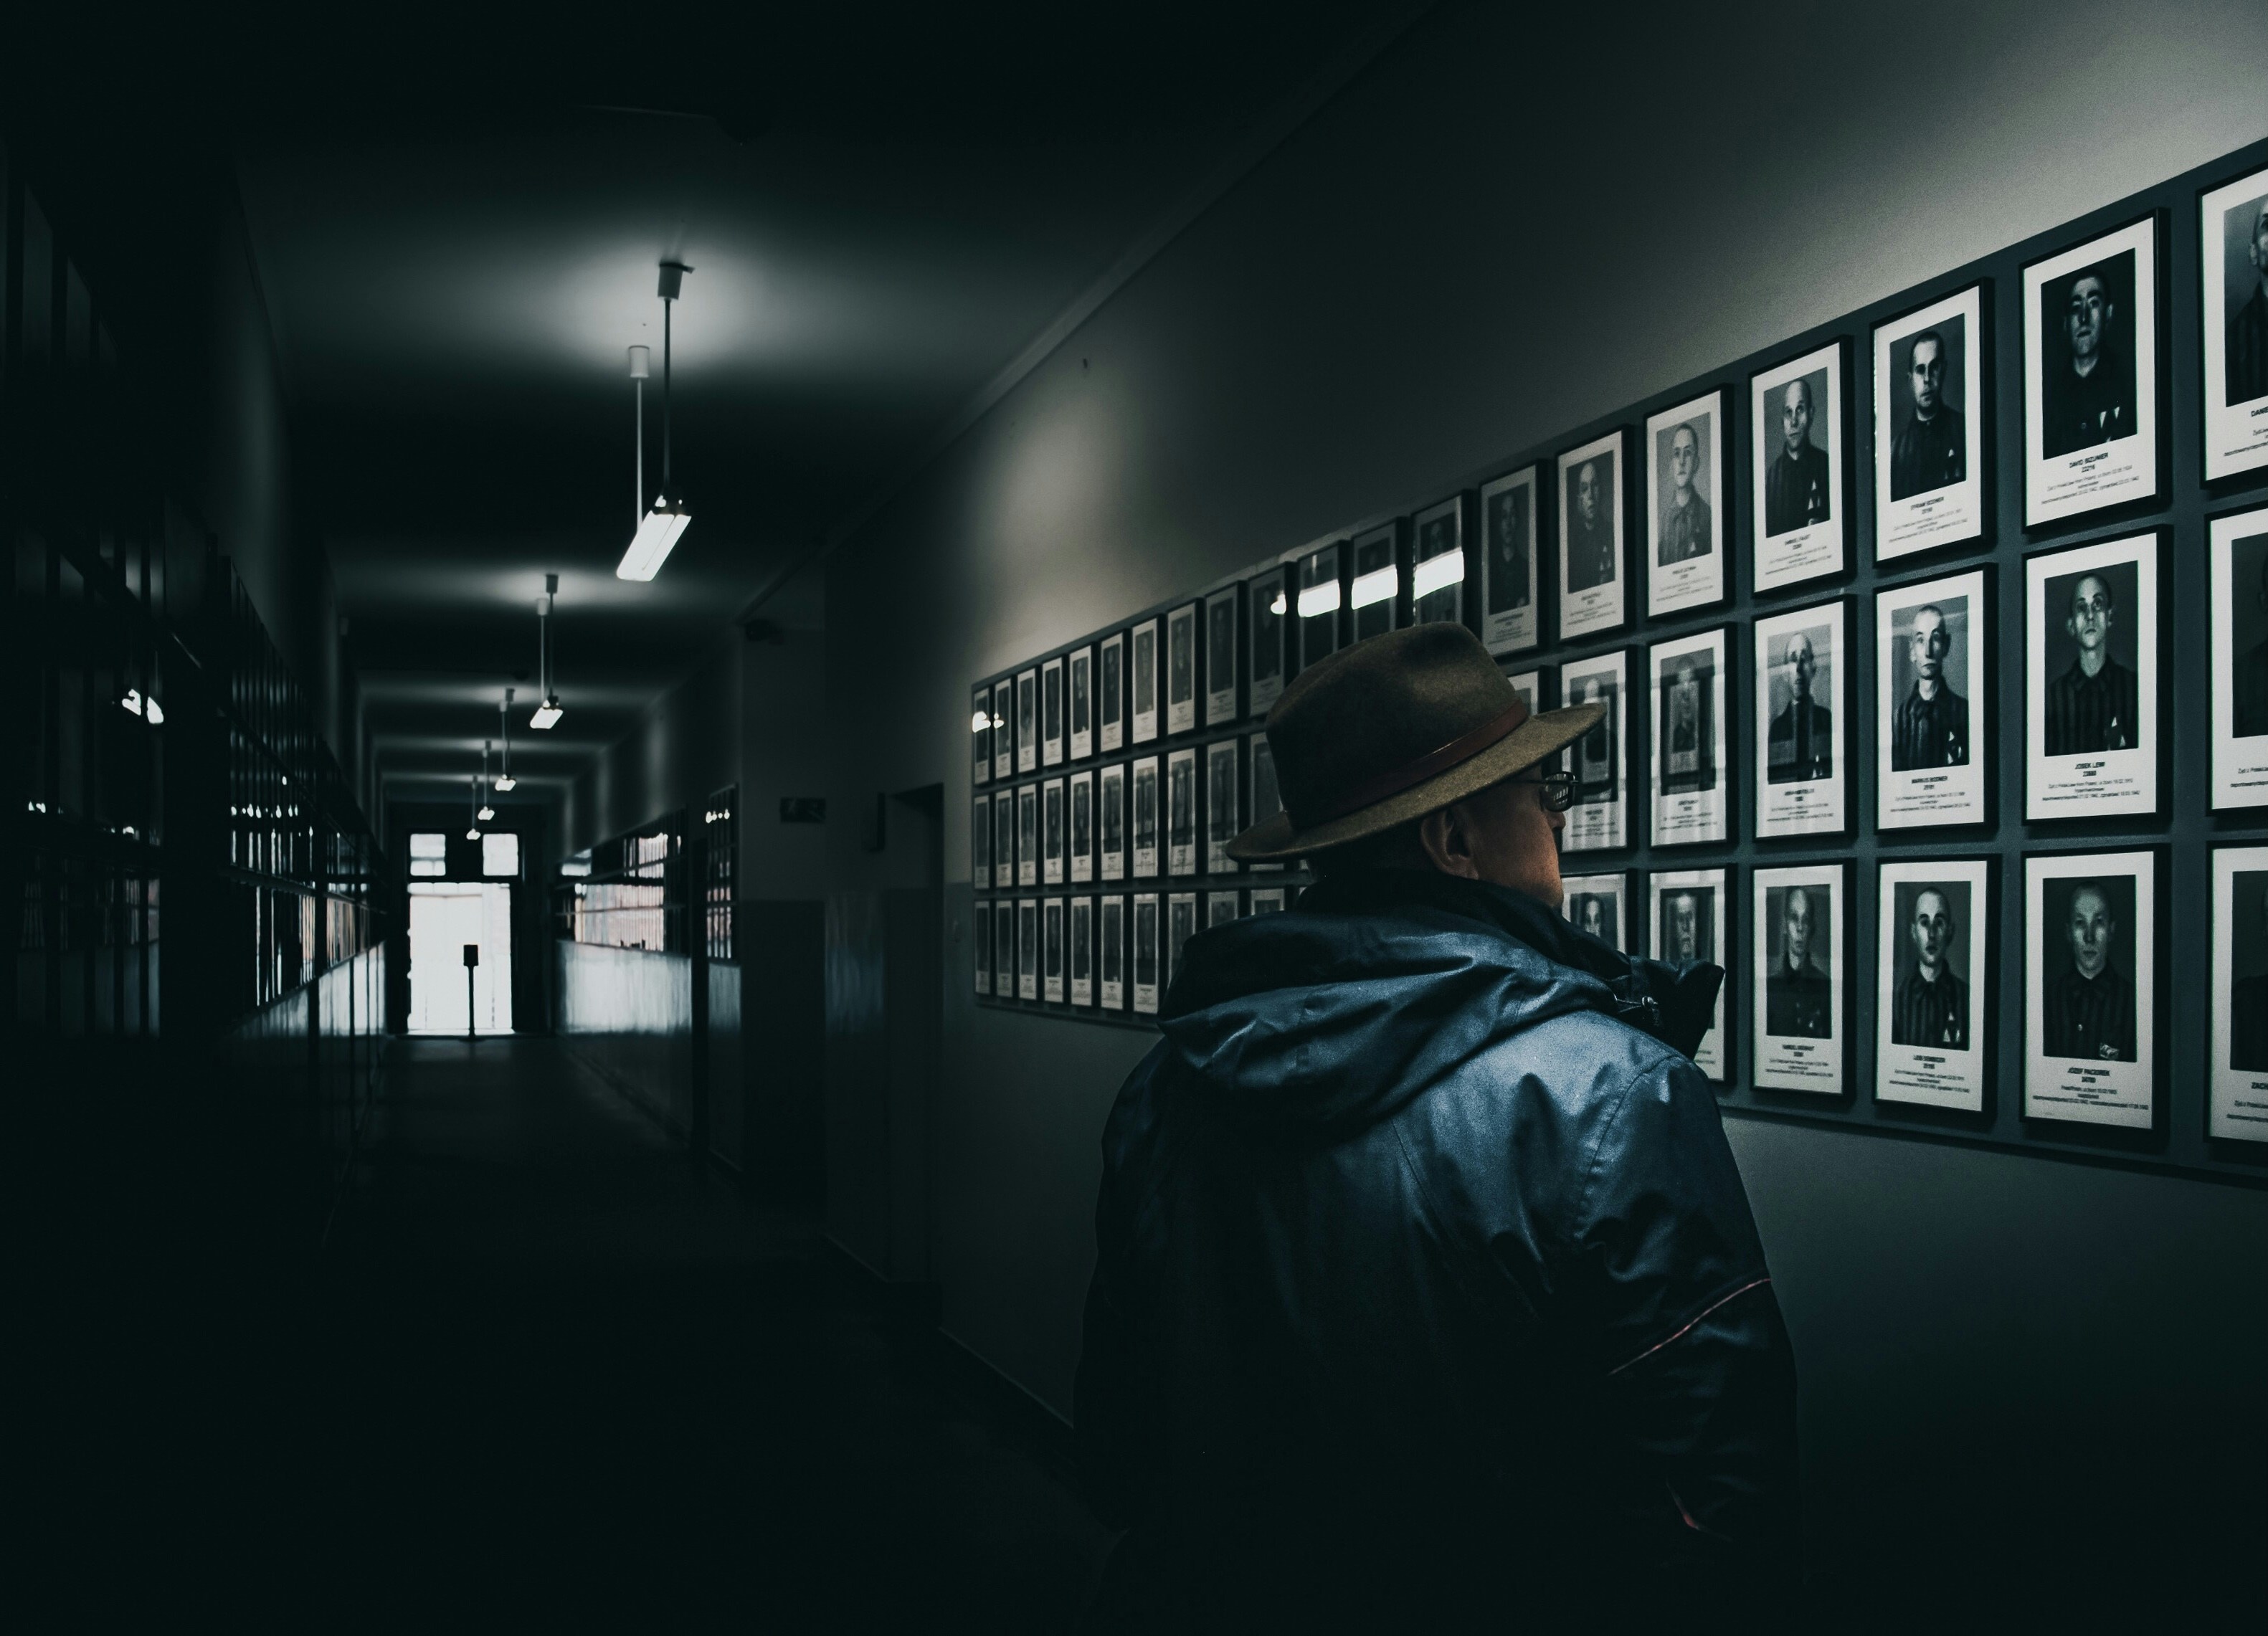 The shot from the Oswiecim museum. The long doorway with thousands of photos of the victims. So cold context in the meta image - historical photos in the historical photo, background in the background, story behind the story.